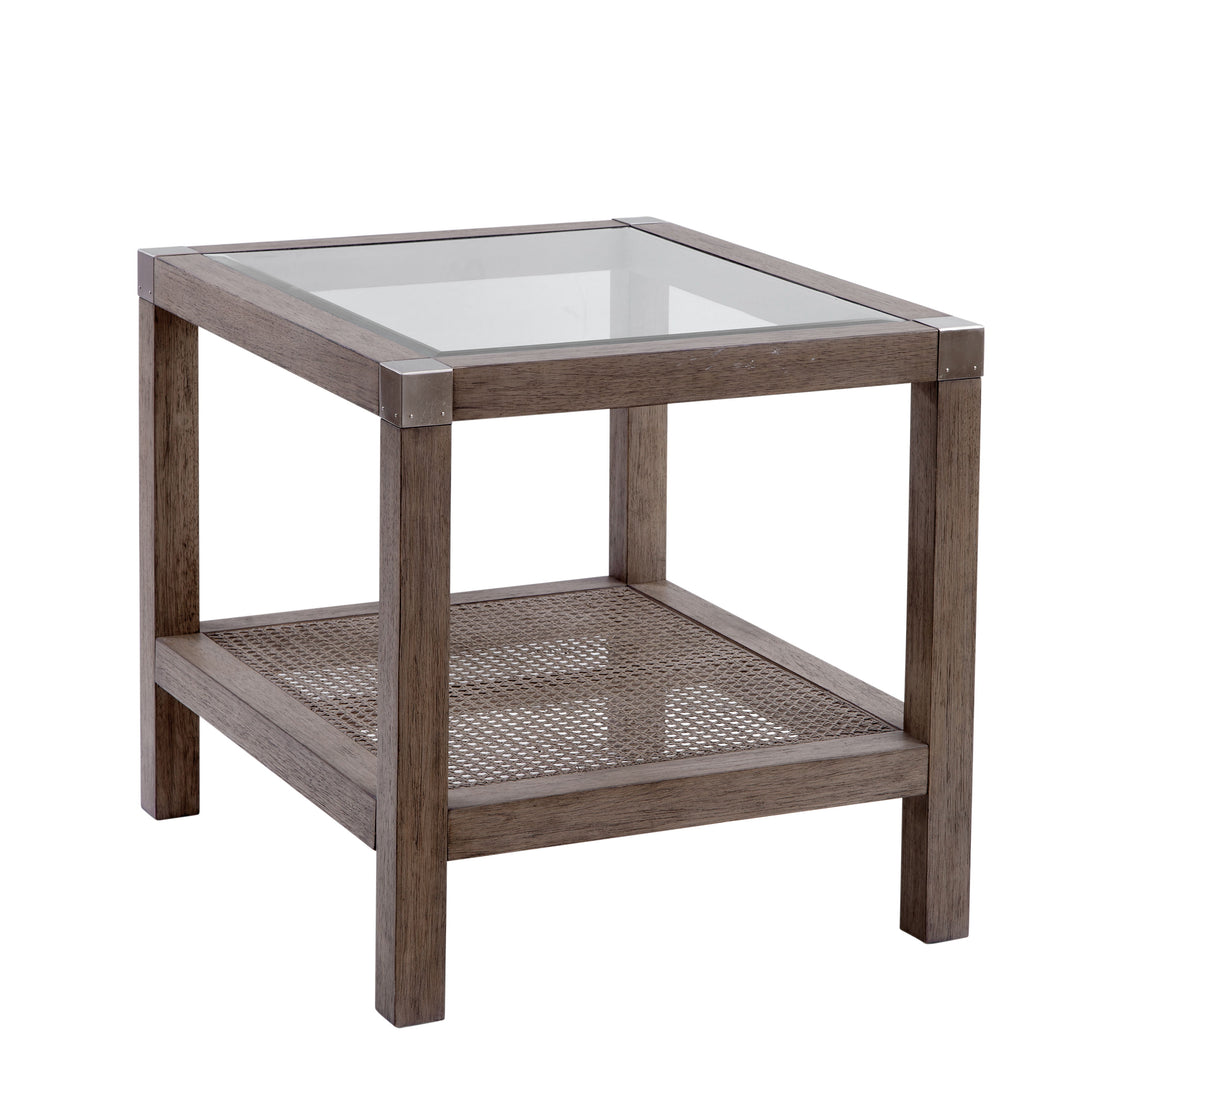 Calum - End Table - Driftwood Gray/Cane/ Brushed Nickel